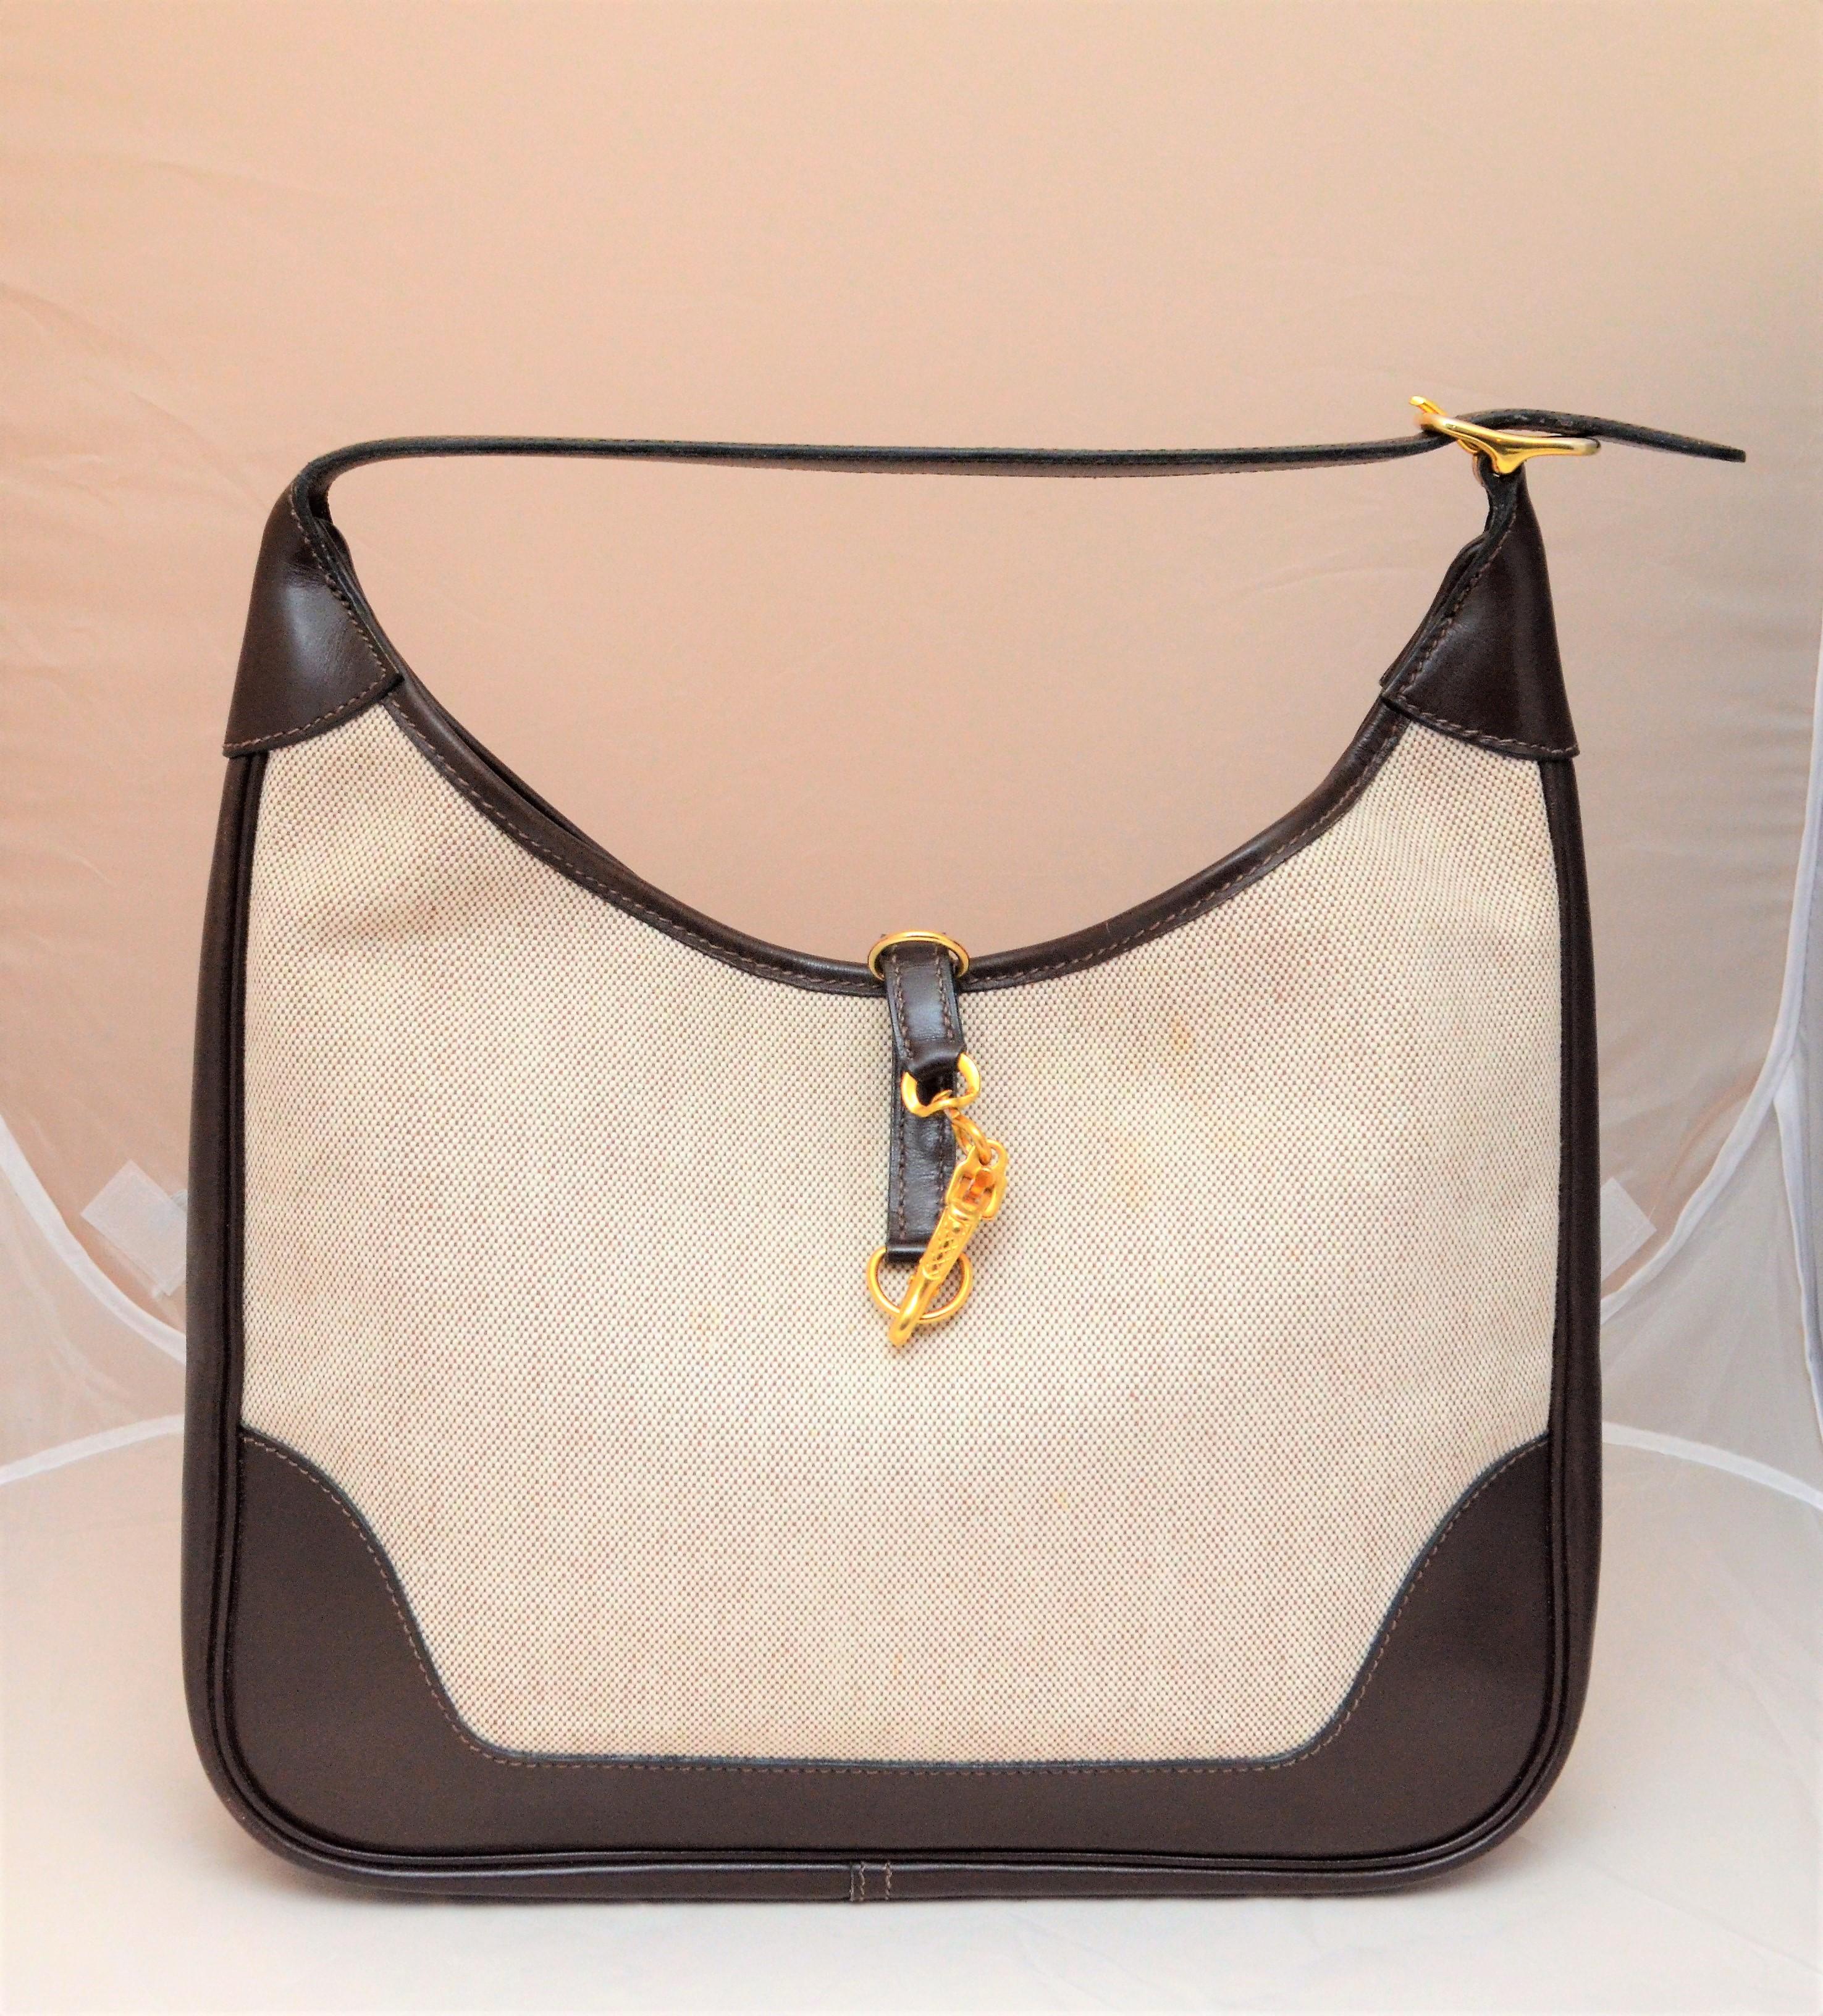 Vintage Hermes Canvas Trim Bag with Extended Shoulder Strap -- Hermes bag is featured in a neutral beige canvas color with brown leather trimmings, gold-tone clip clasp closure at the top, and an additional leather shoulder strap to extend drop